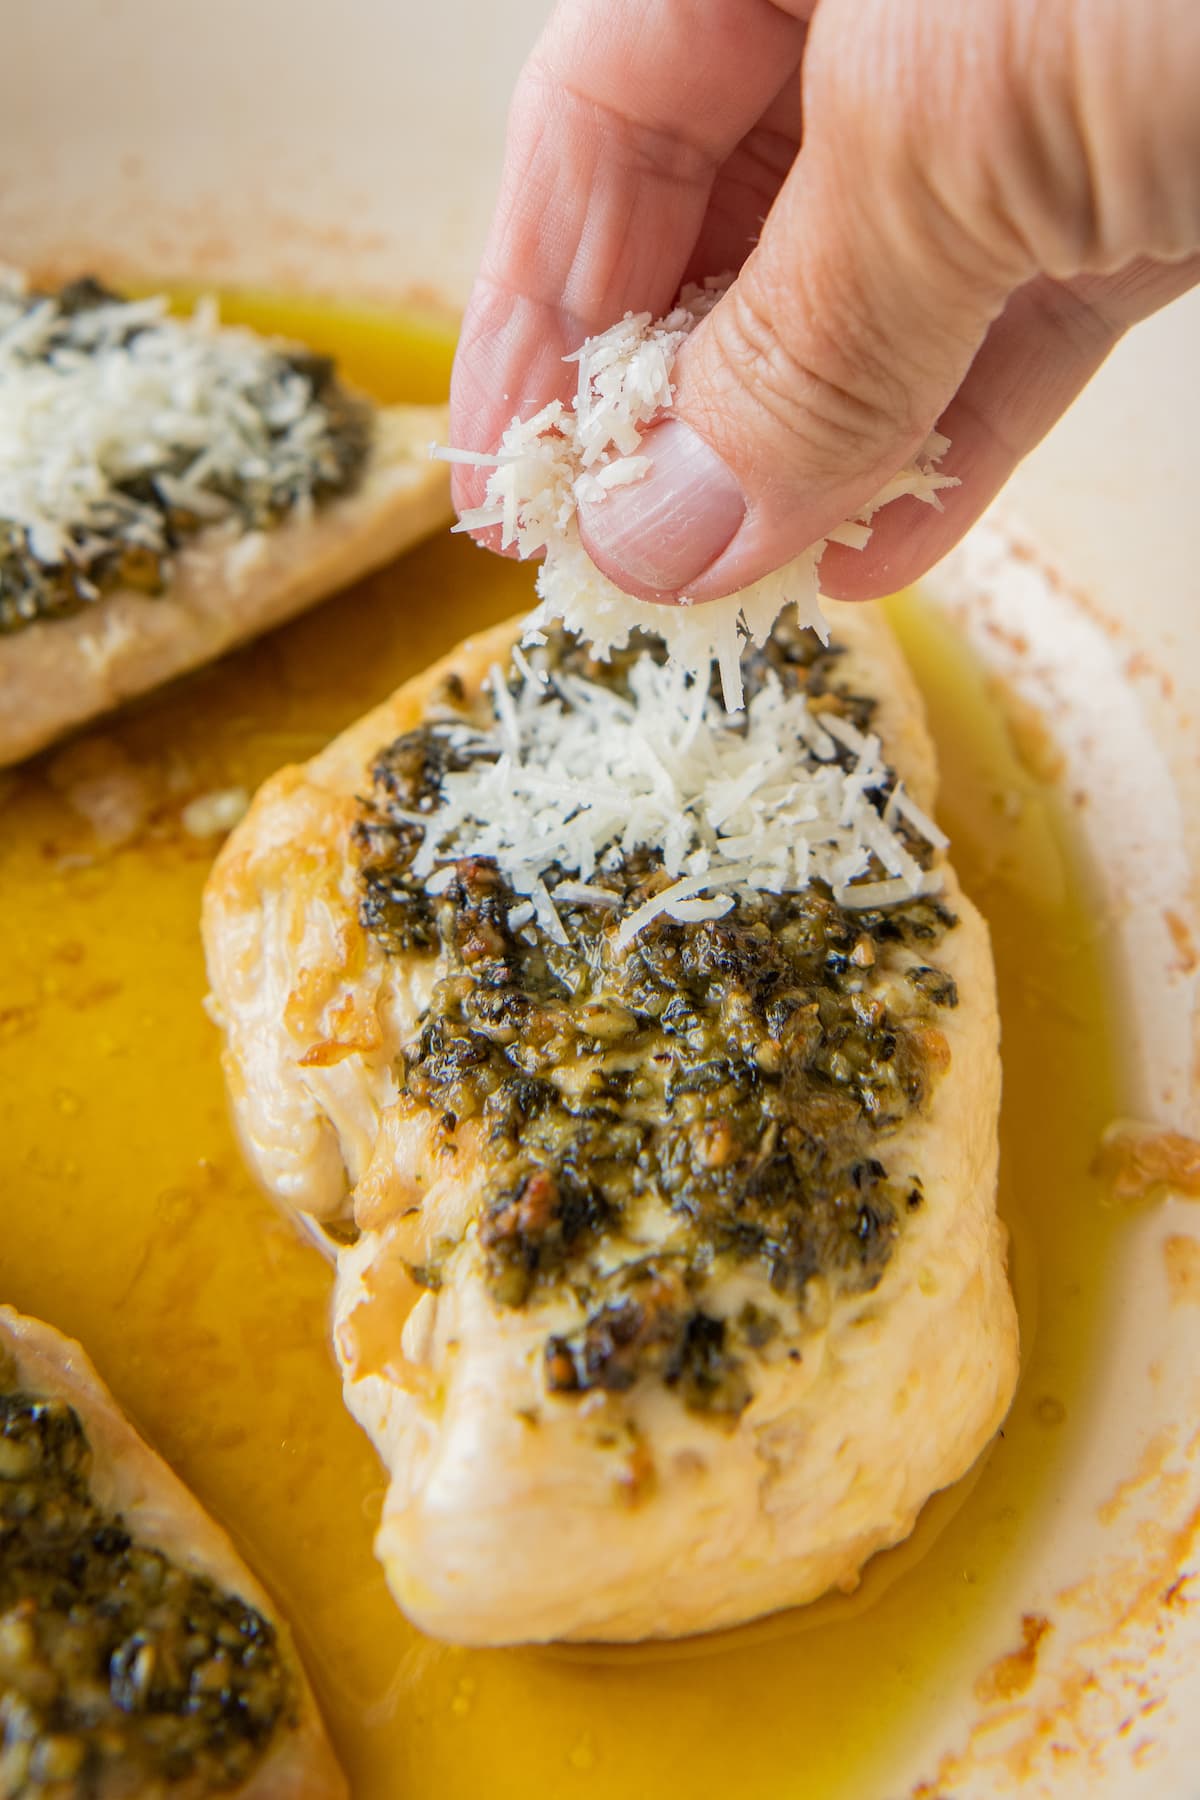 garnishing a cooked chicken breast with pesto with some shredded parmesan cheese